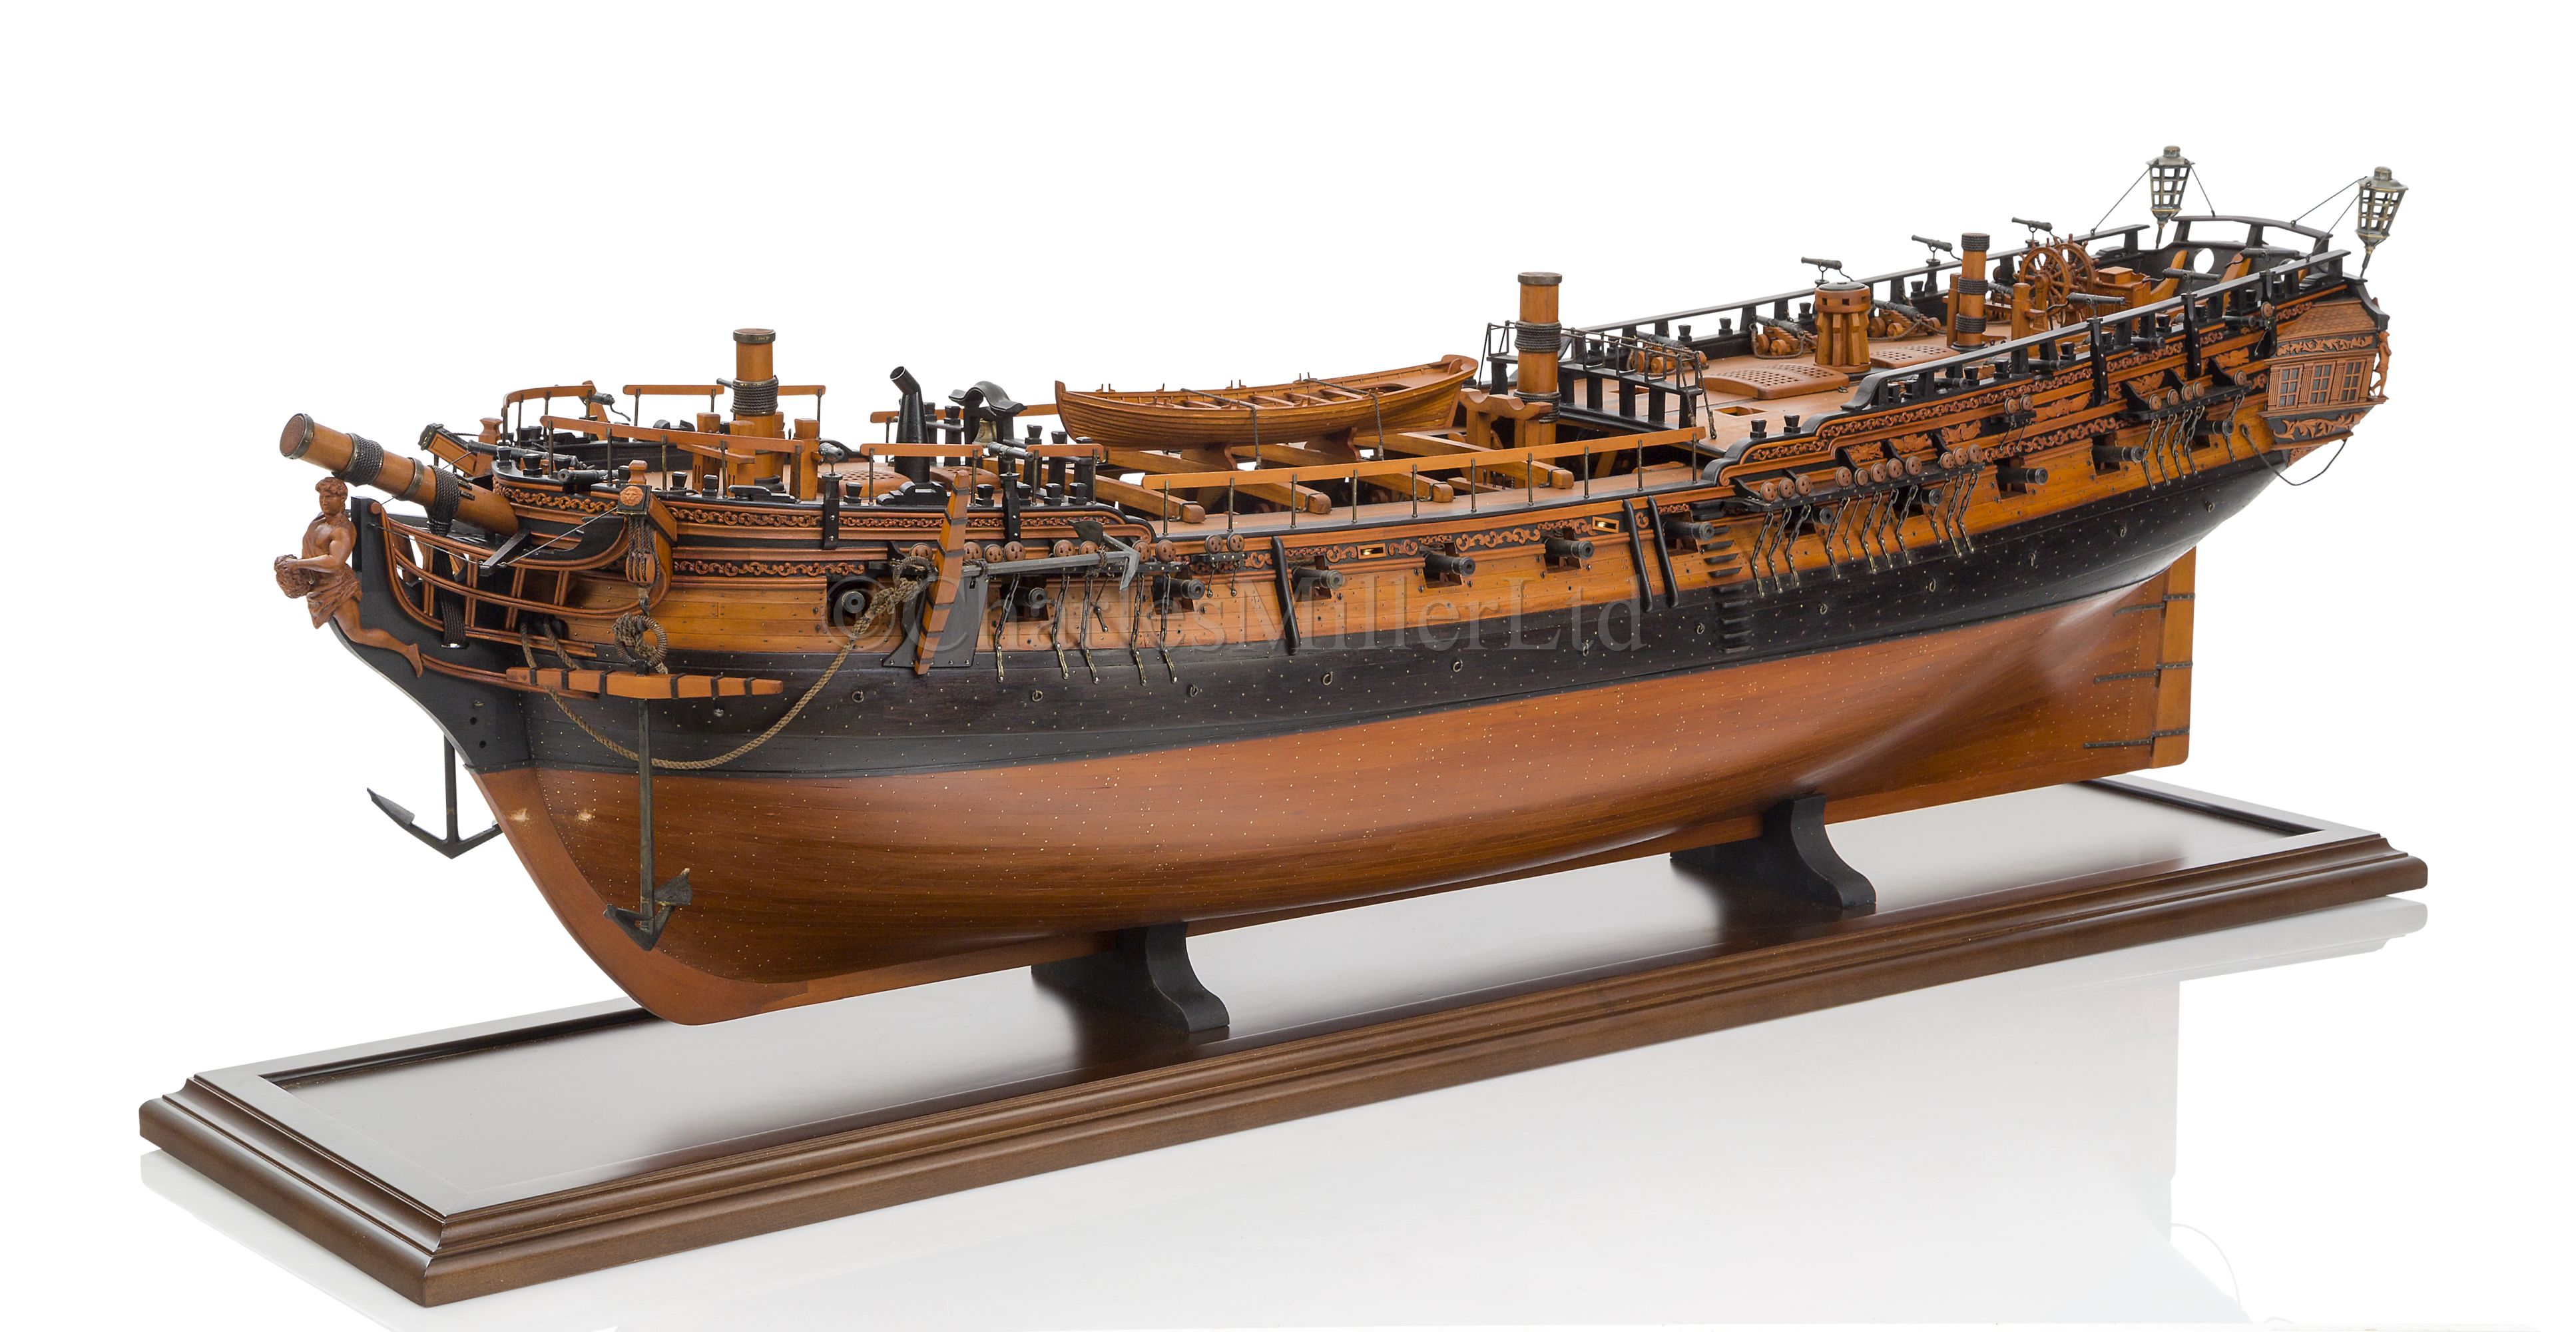 A VERY FINE 1:36 SCALE ADMIRALTY BOARD STYLE MODEL FOR THE SIXTH RATE 28 GUNS SHIP ENTERPRISE